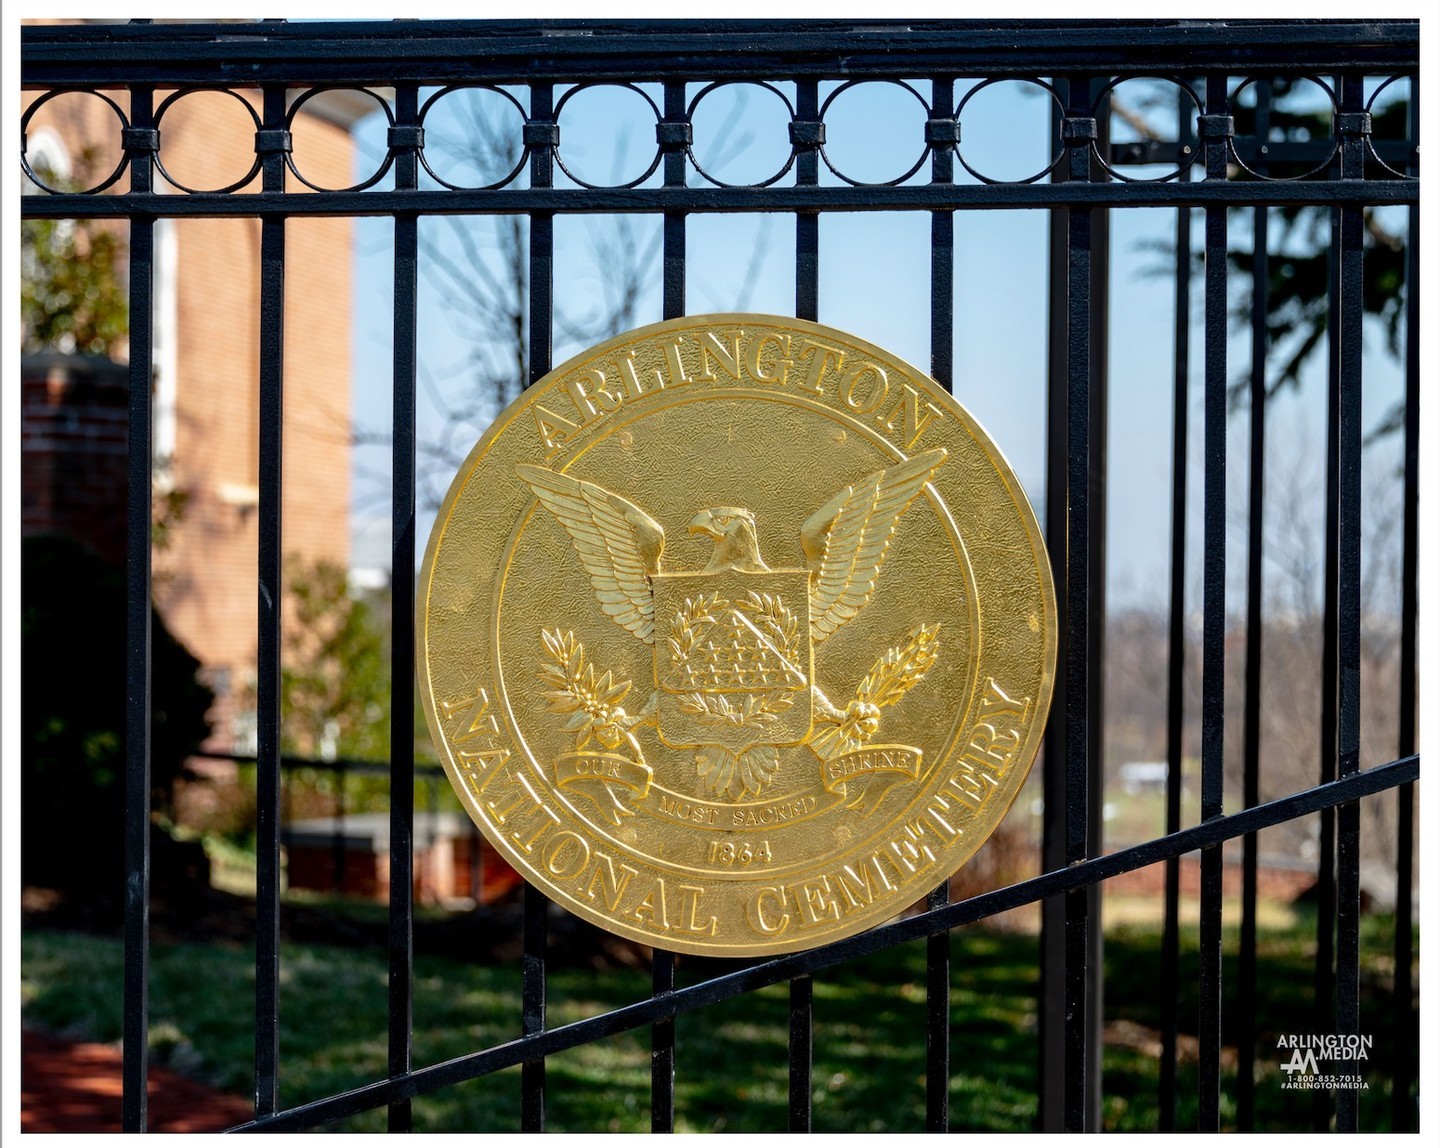 The Arlington National Cemetery symbol on the gate between Fort Myer Henderson Hall and Arlington National Cemetery.  This gate serves as the entrance point for honored veterans and family members passing into the cemetery from services held at The Old Post Chapel on Fort Myer.